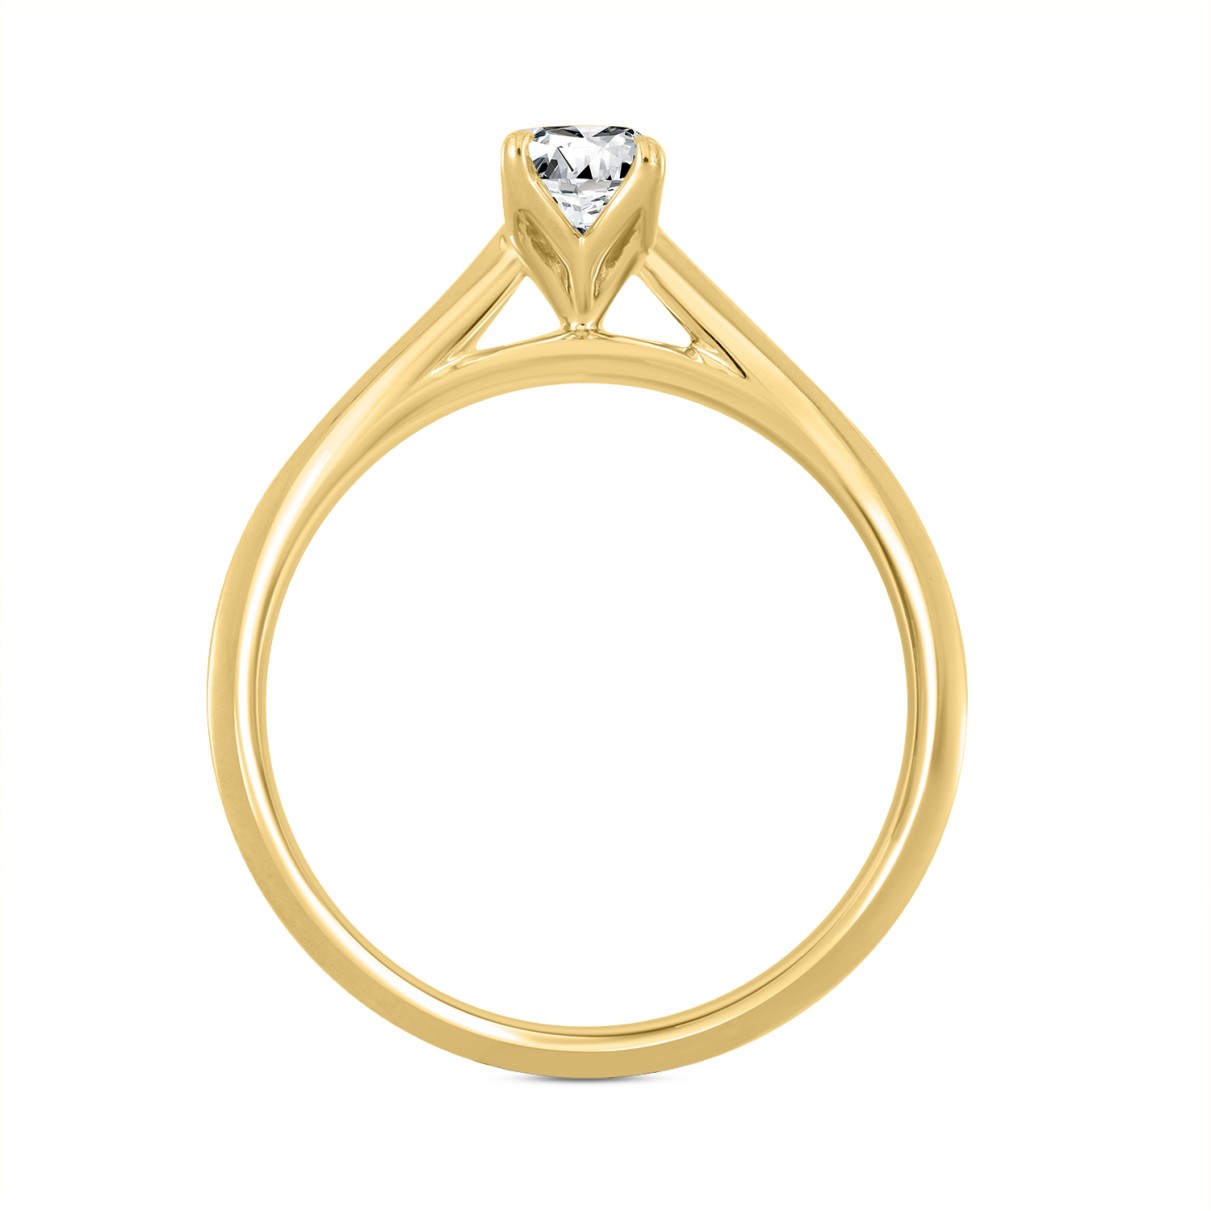 LADIES SOLITAIRE RING 1 1/2CT PEAR DIAMOND 14K YELLOW GOLD